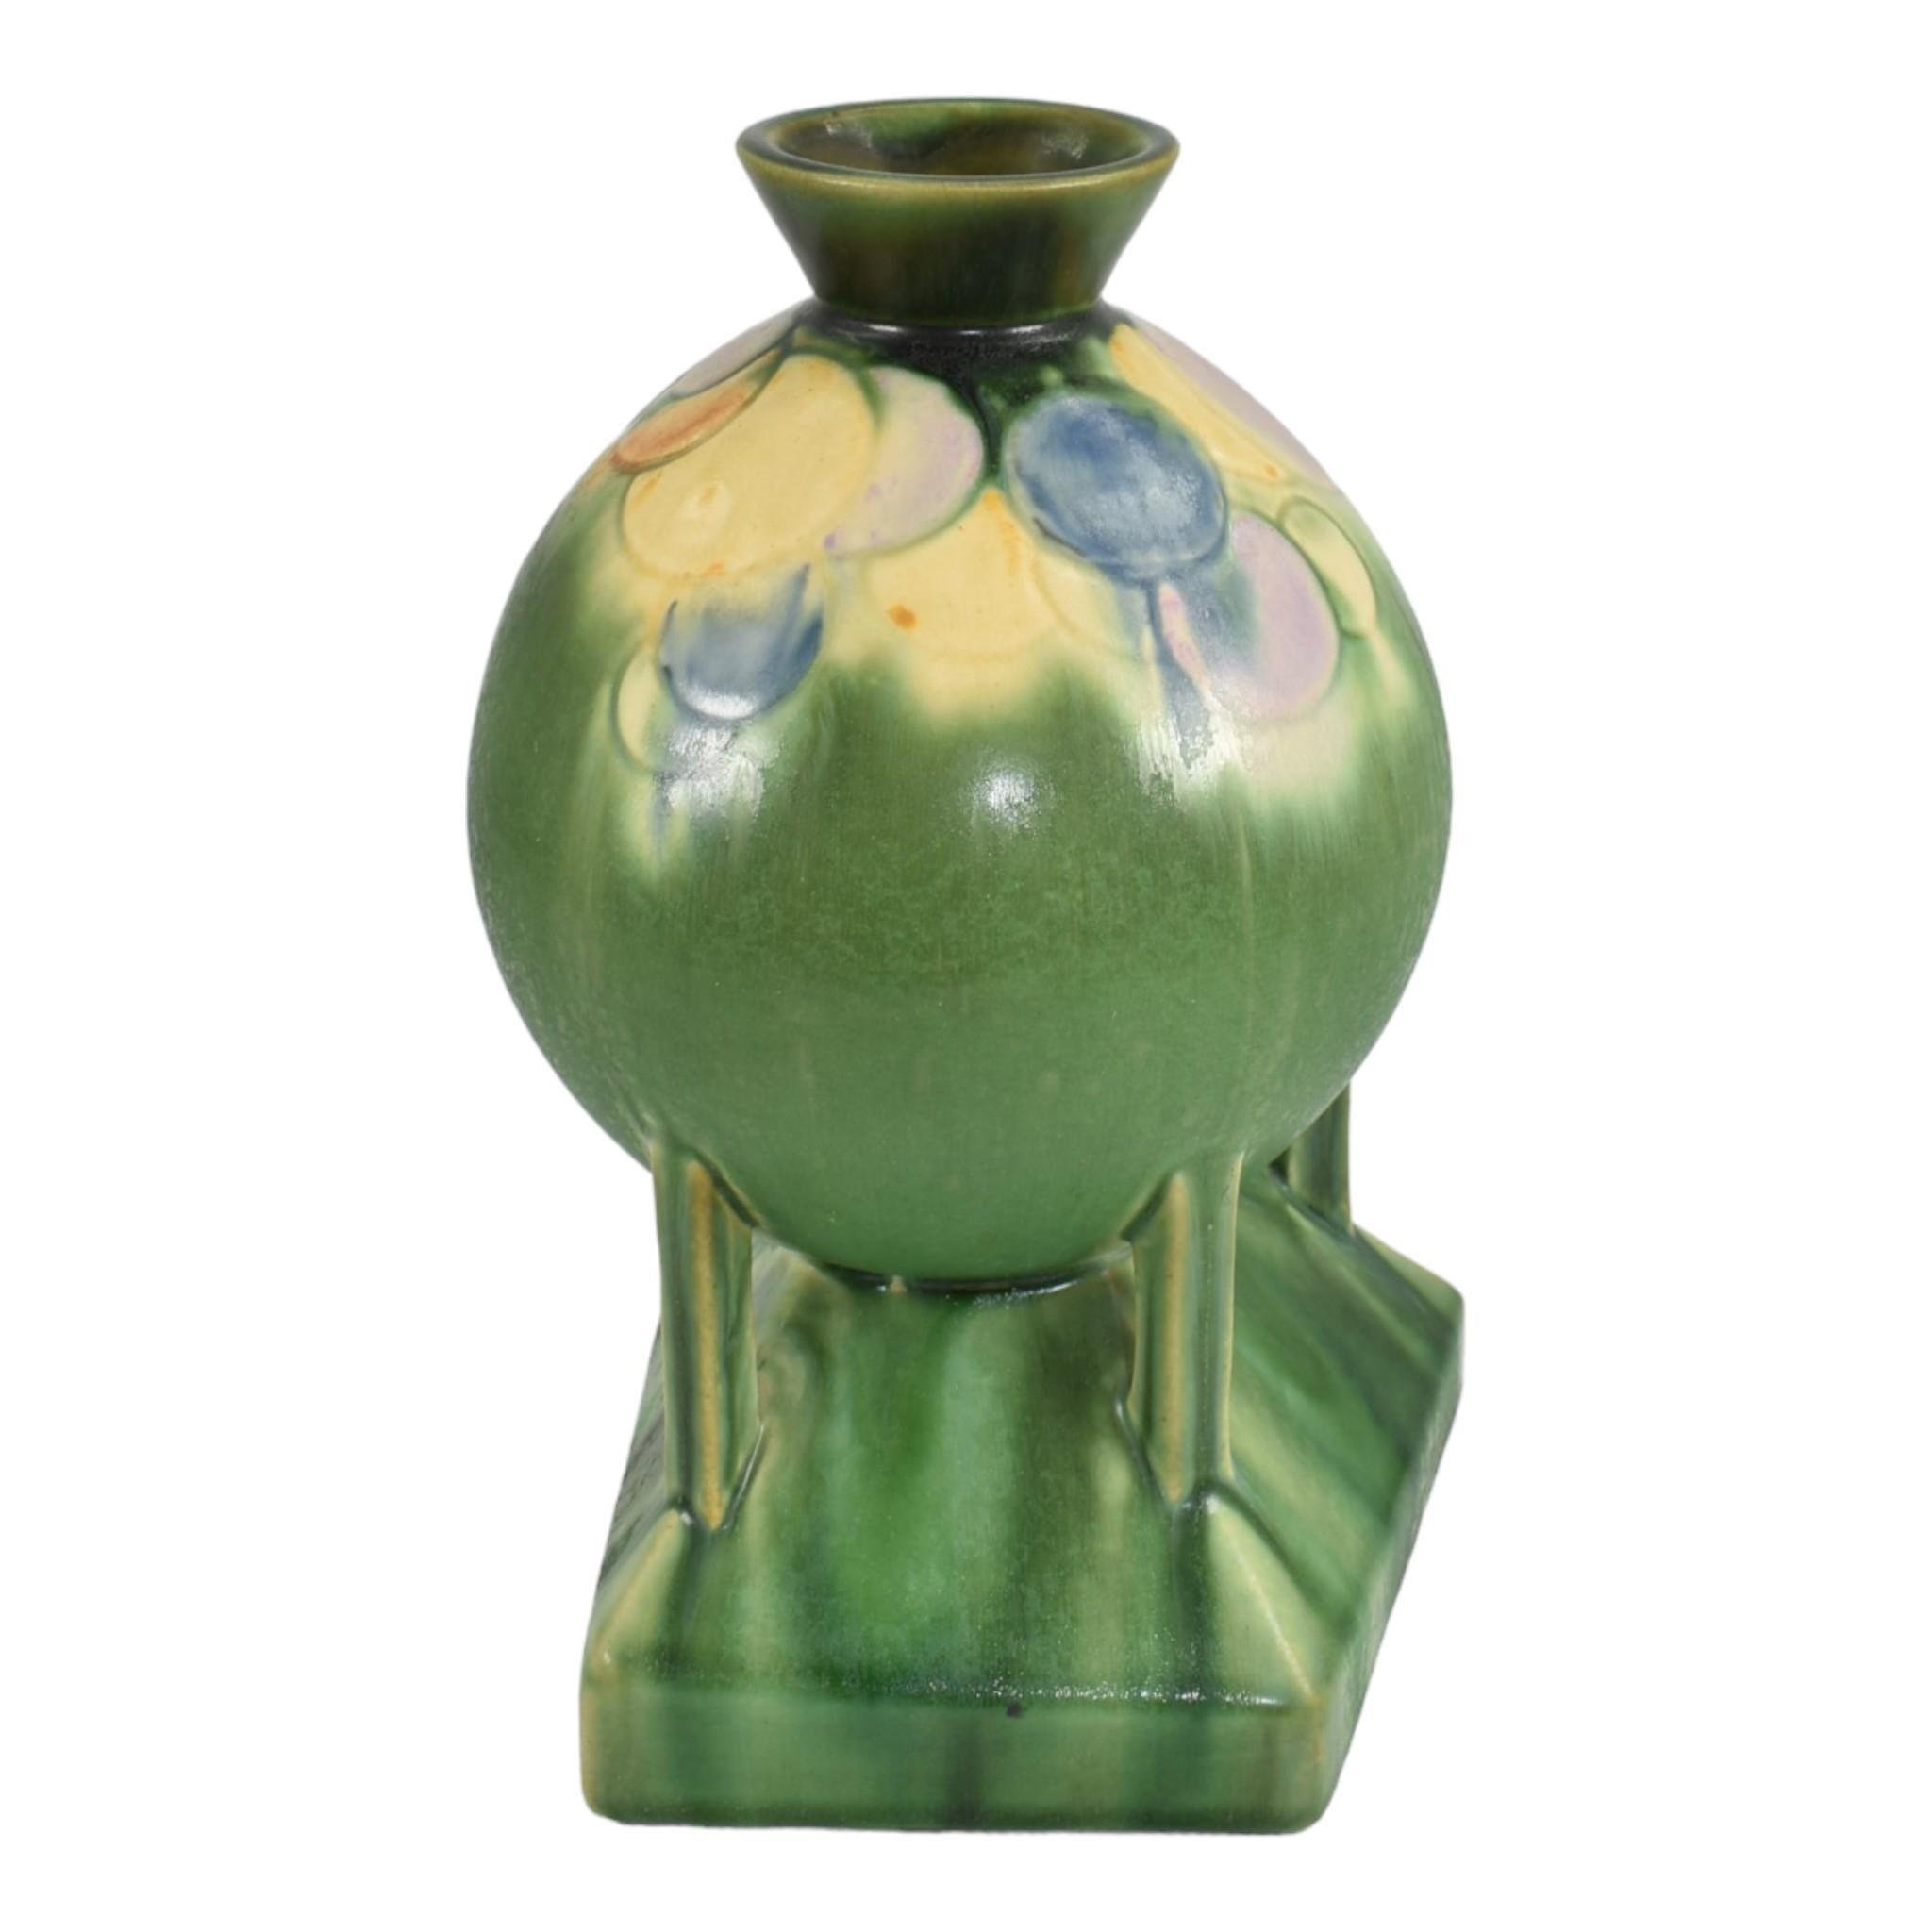 Roseville Futura Green 1928 Vintage Art Deco Pottery Balloons Globe Vase 404-8
Rare and highly sought after art deco form in green with pastel balloons. 
Great mold and color.
Excellent original condition. No chips, cracks, damage or repair of any